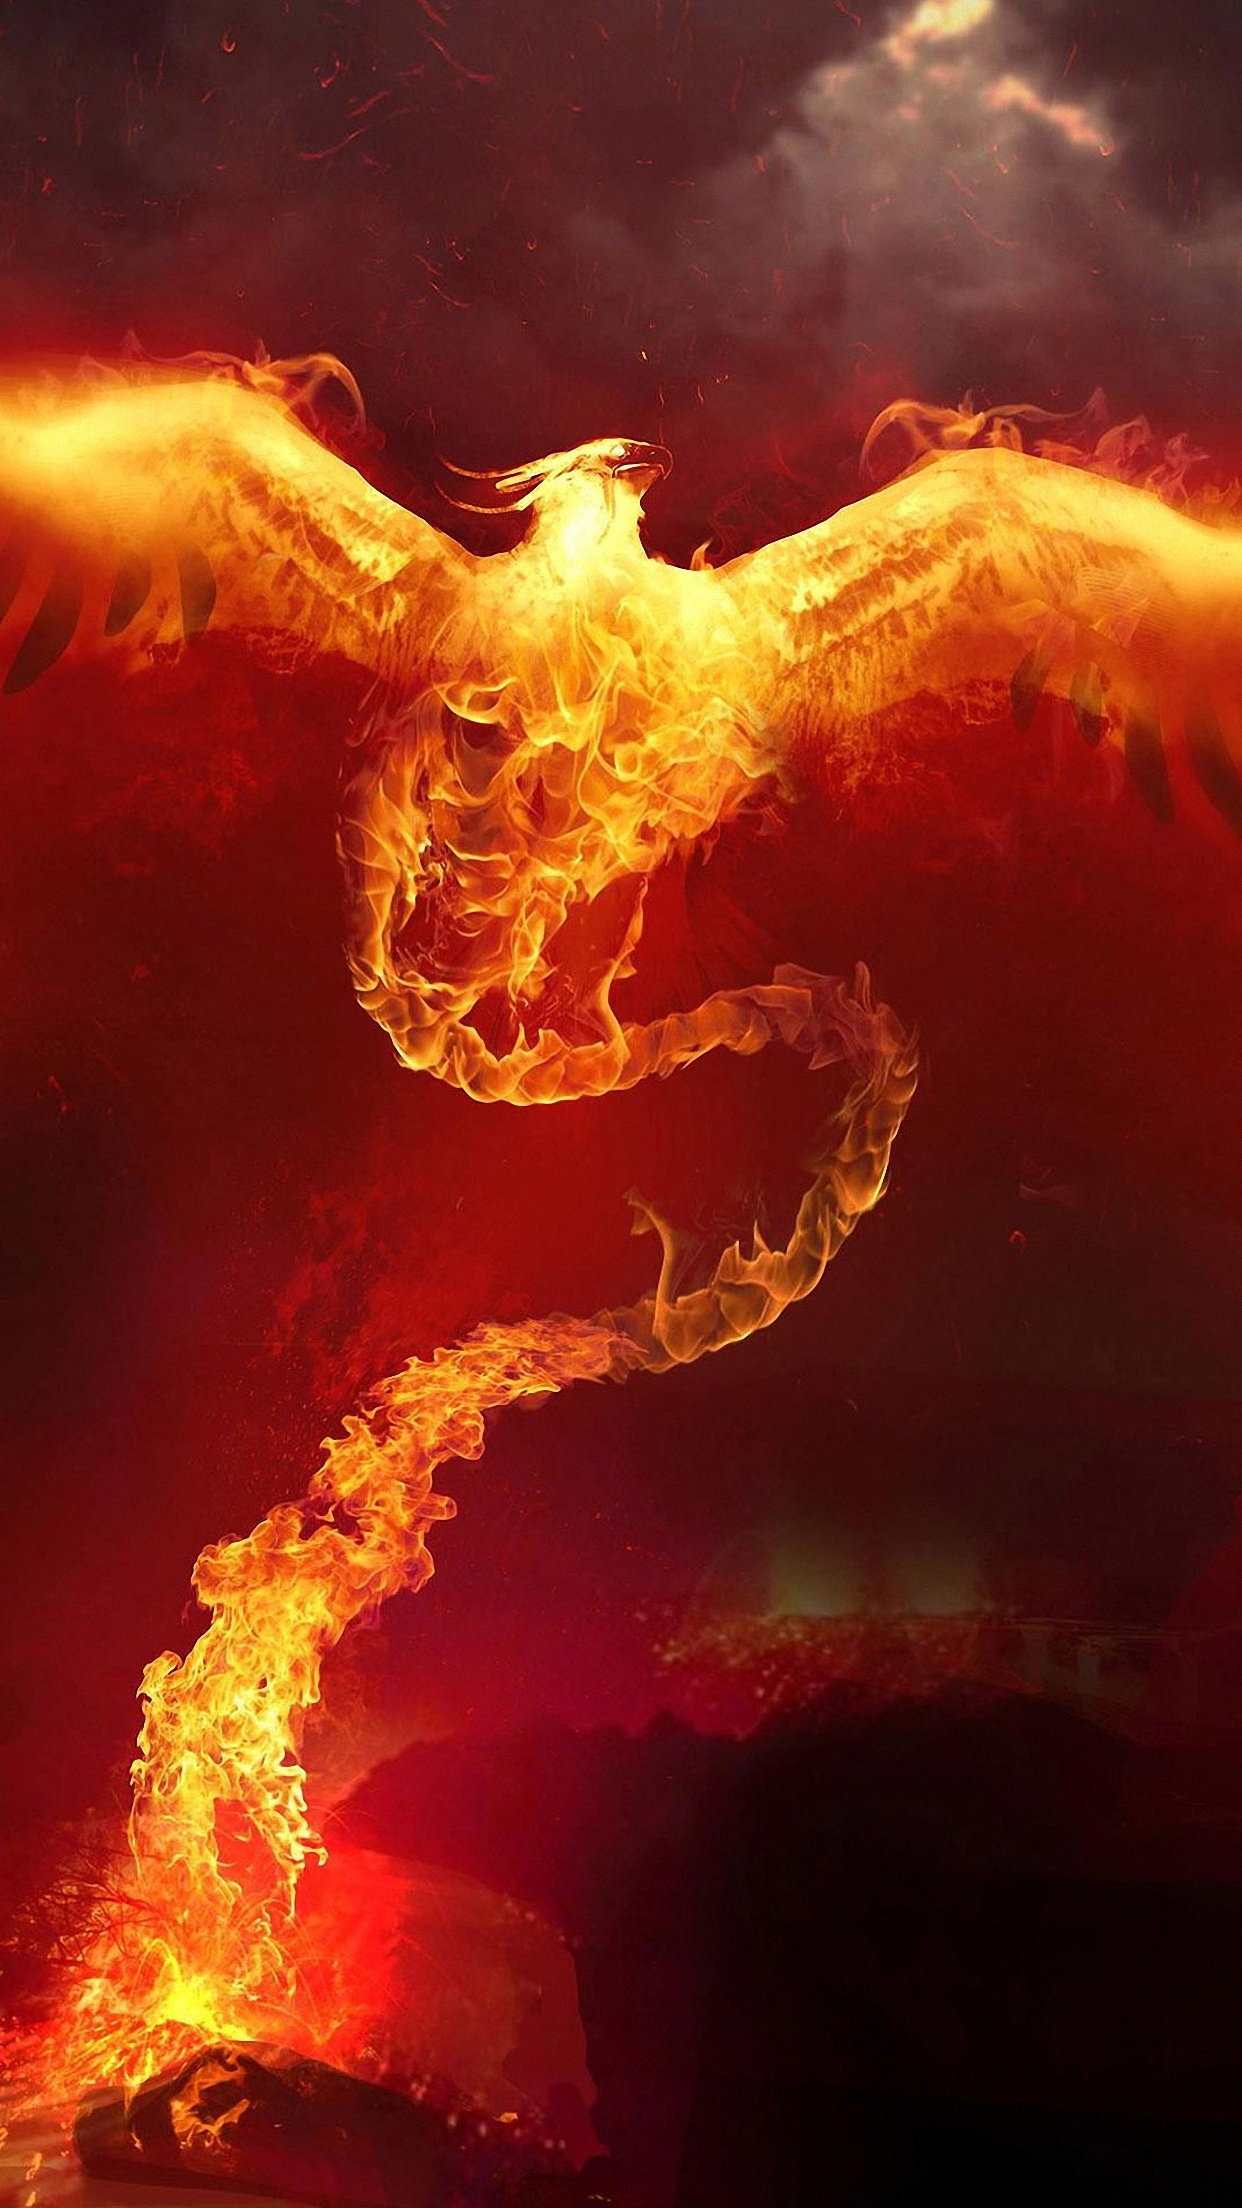 Fire phone wallpapers, fire images, Stunning flames, Fiery phone backgrounds, Intense fire moments, 1250x2210 HD Phone